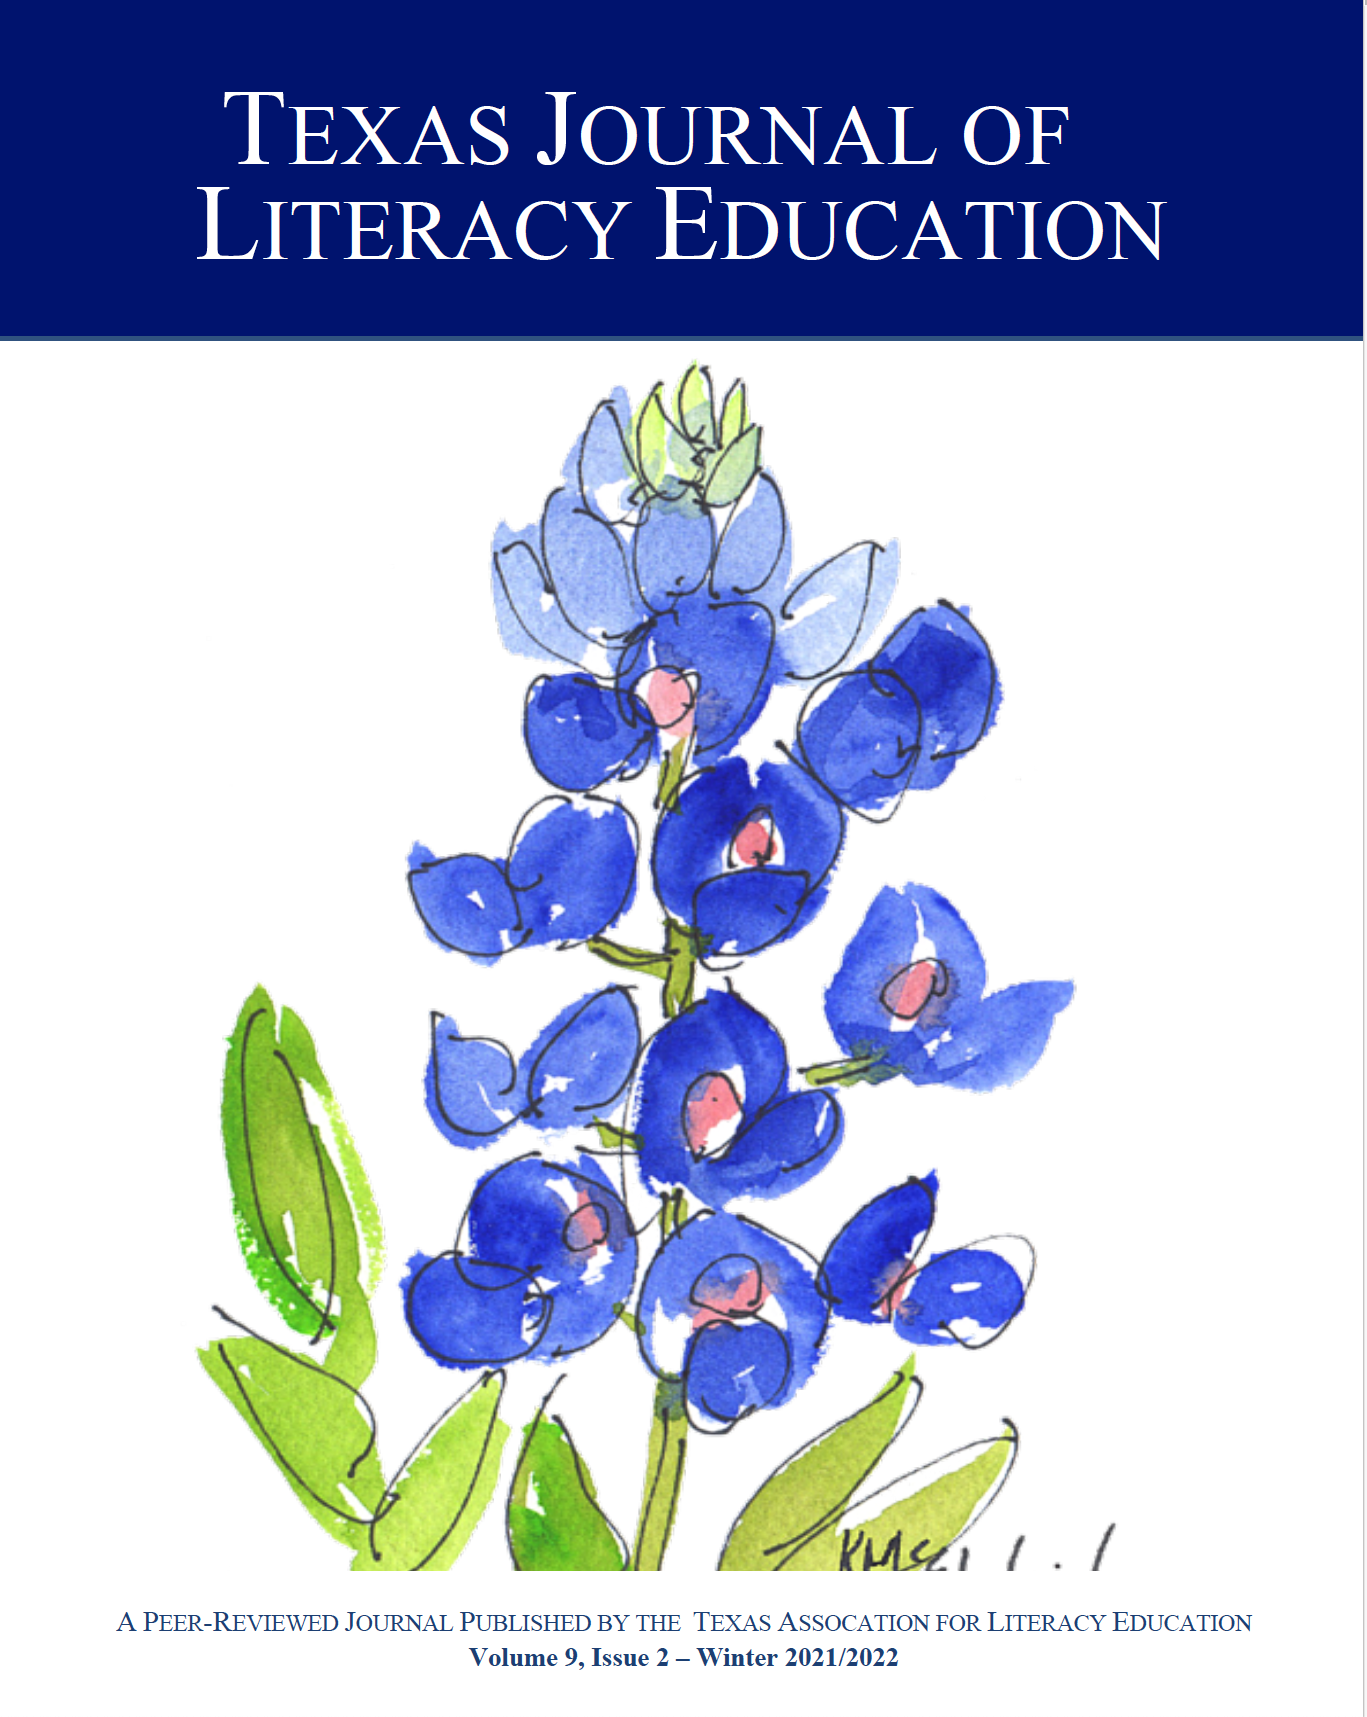 Cover page with watercolor of bluebonnets